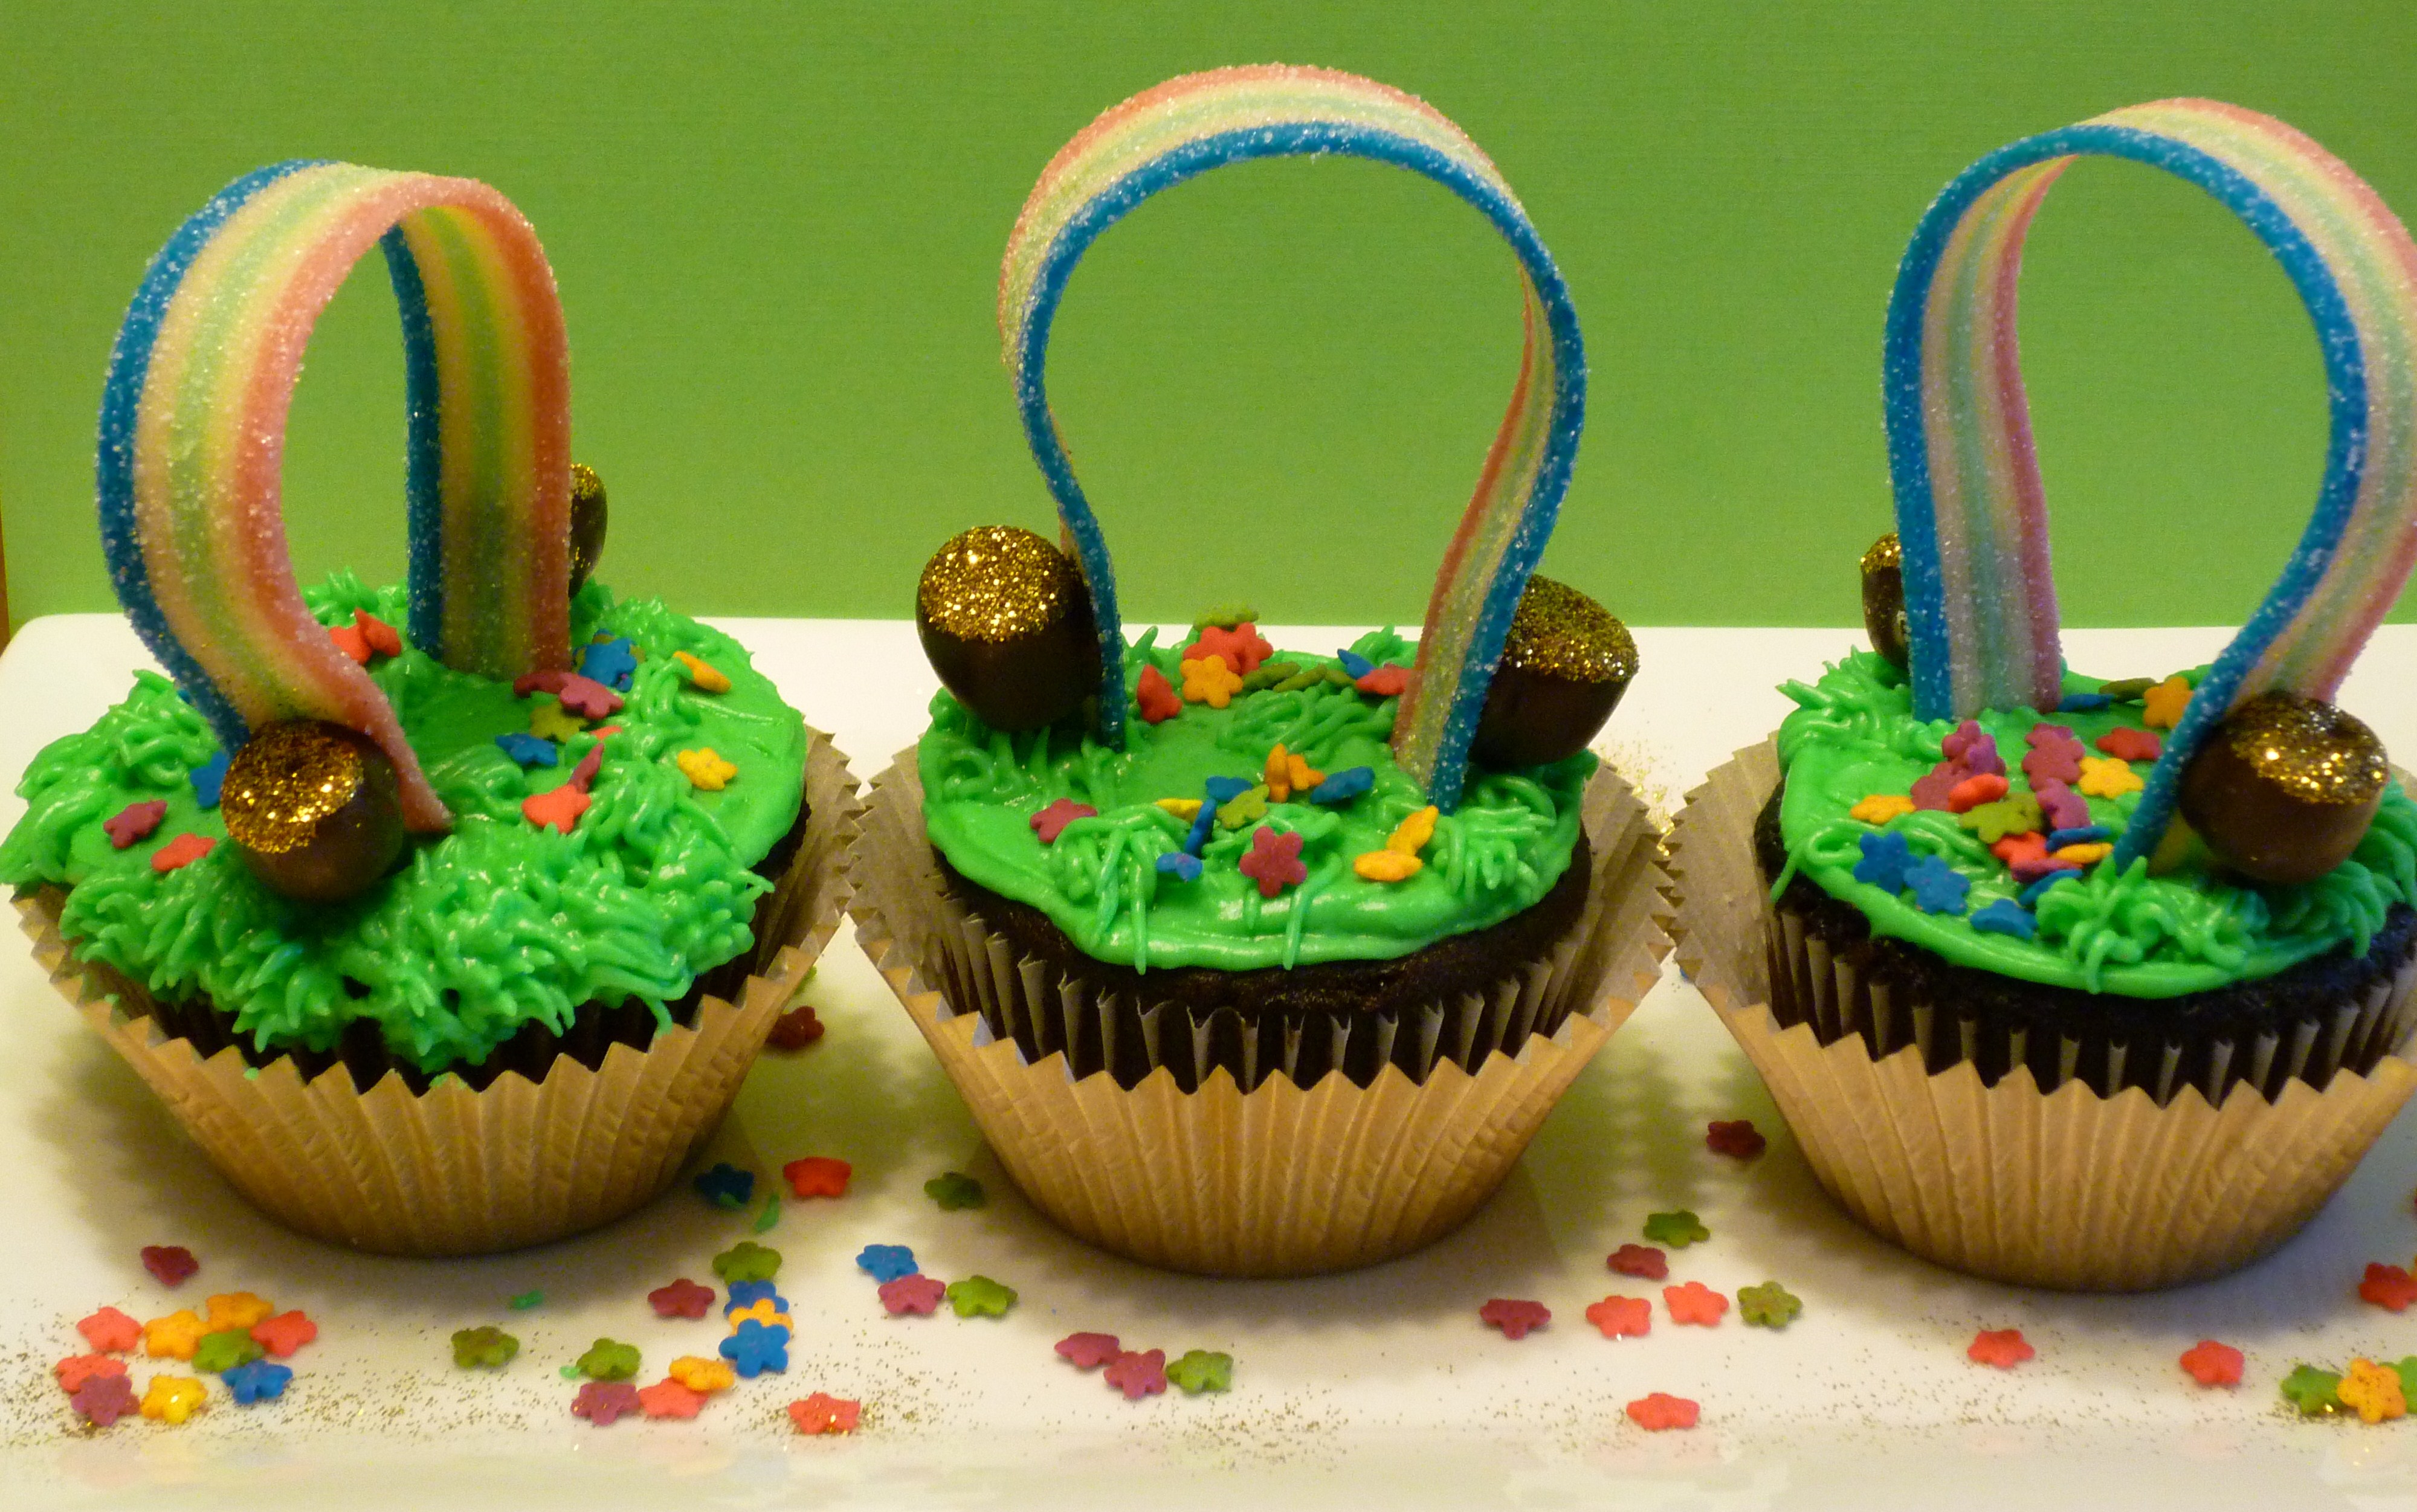 Rainbows and pots of gold cupcakes